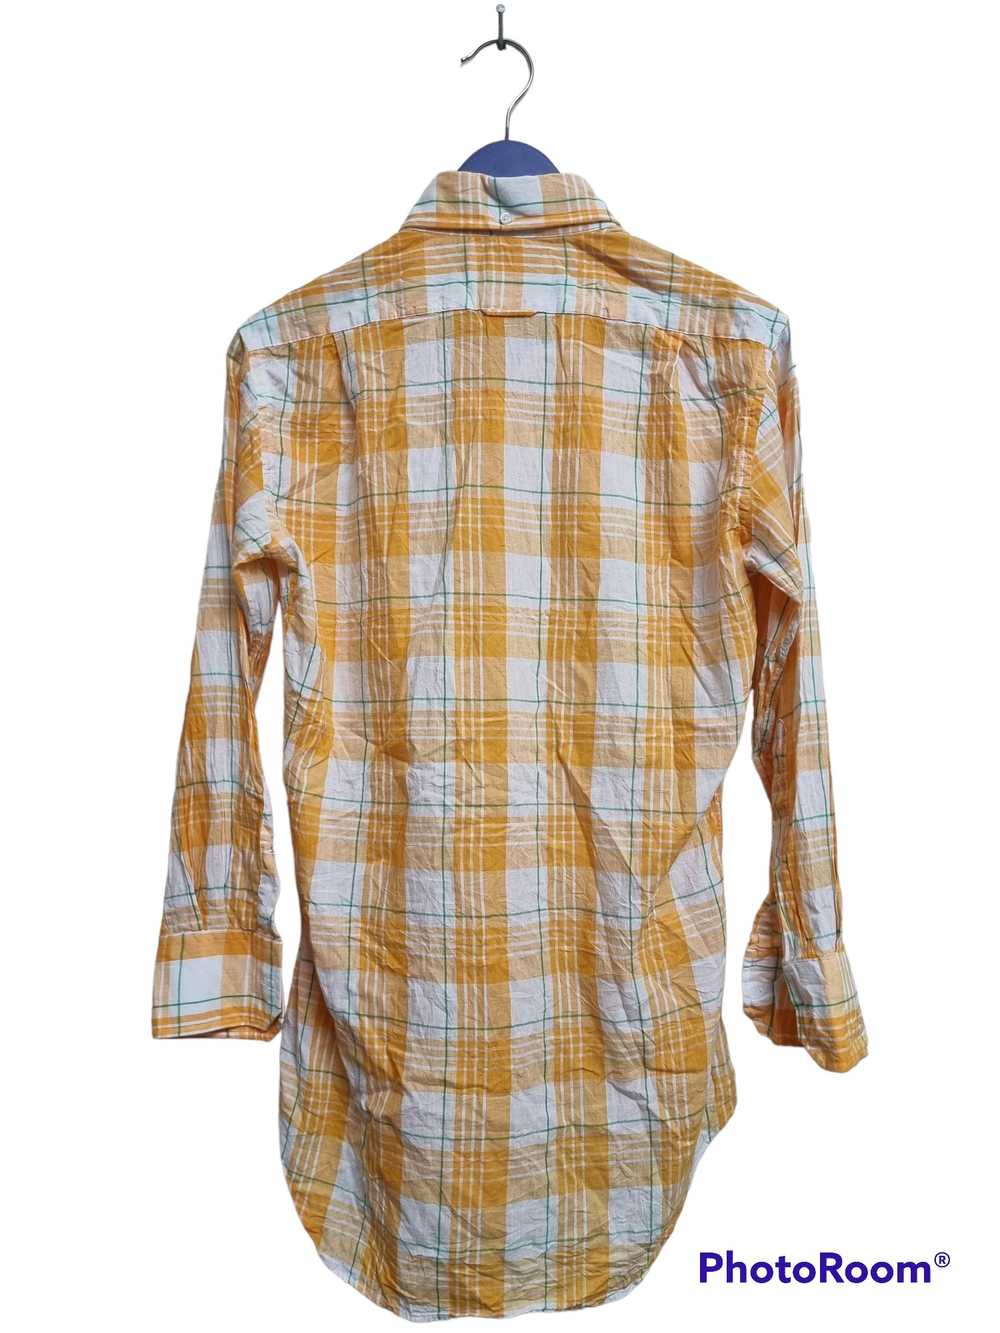 Thom Browne yellow cotton plaid button up shirt - image 2